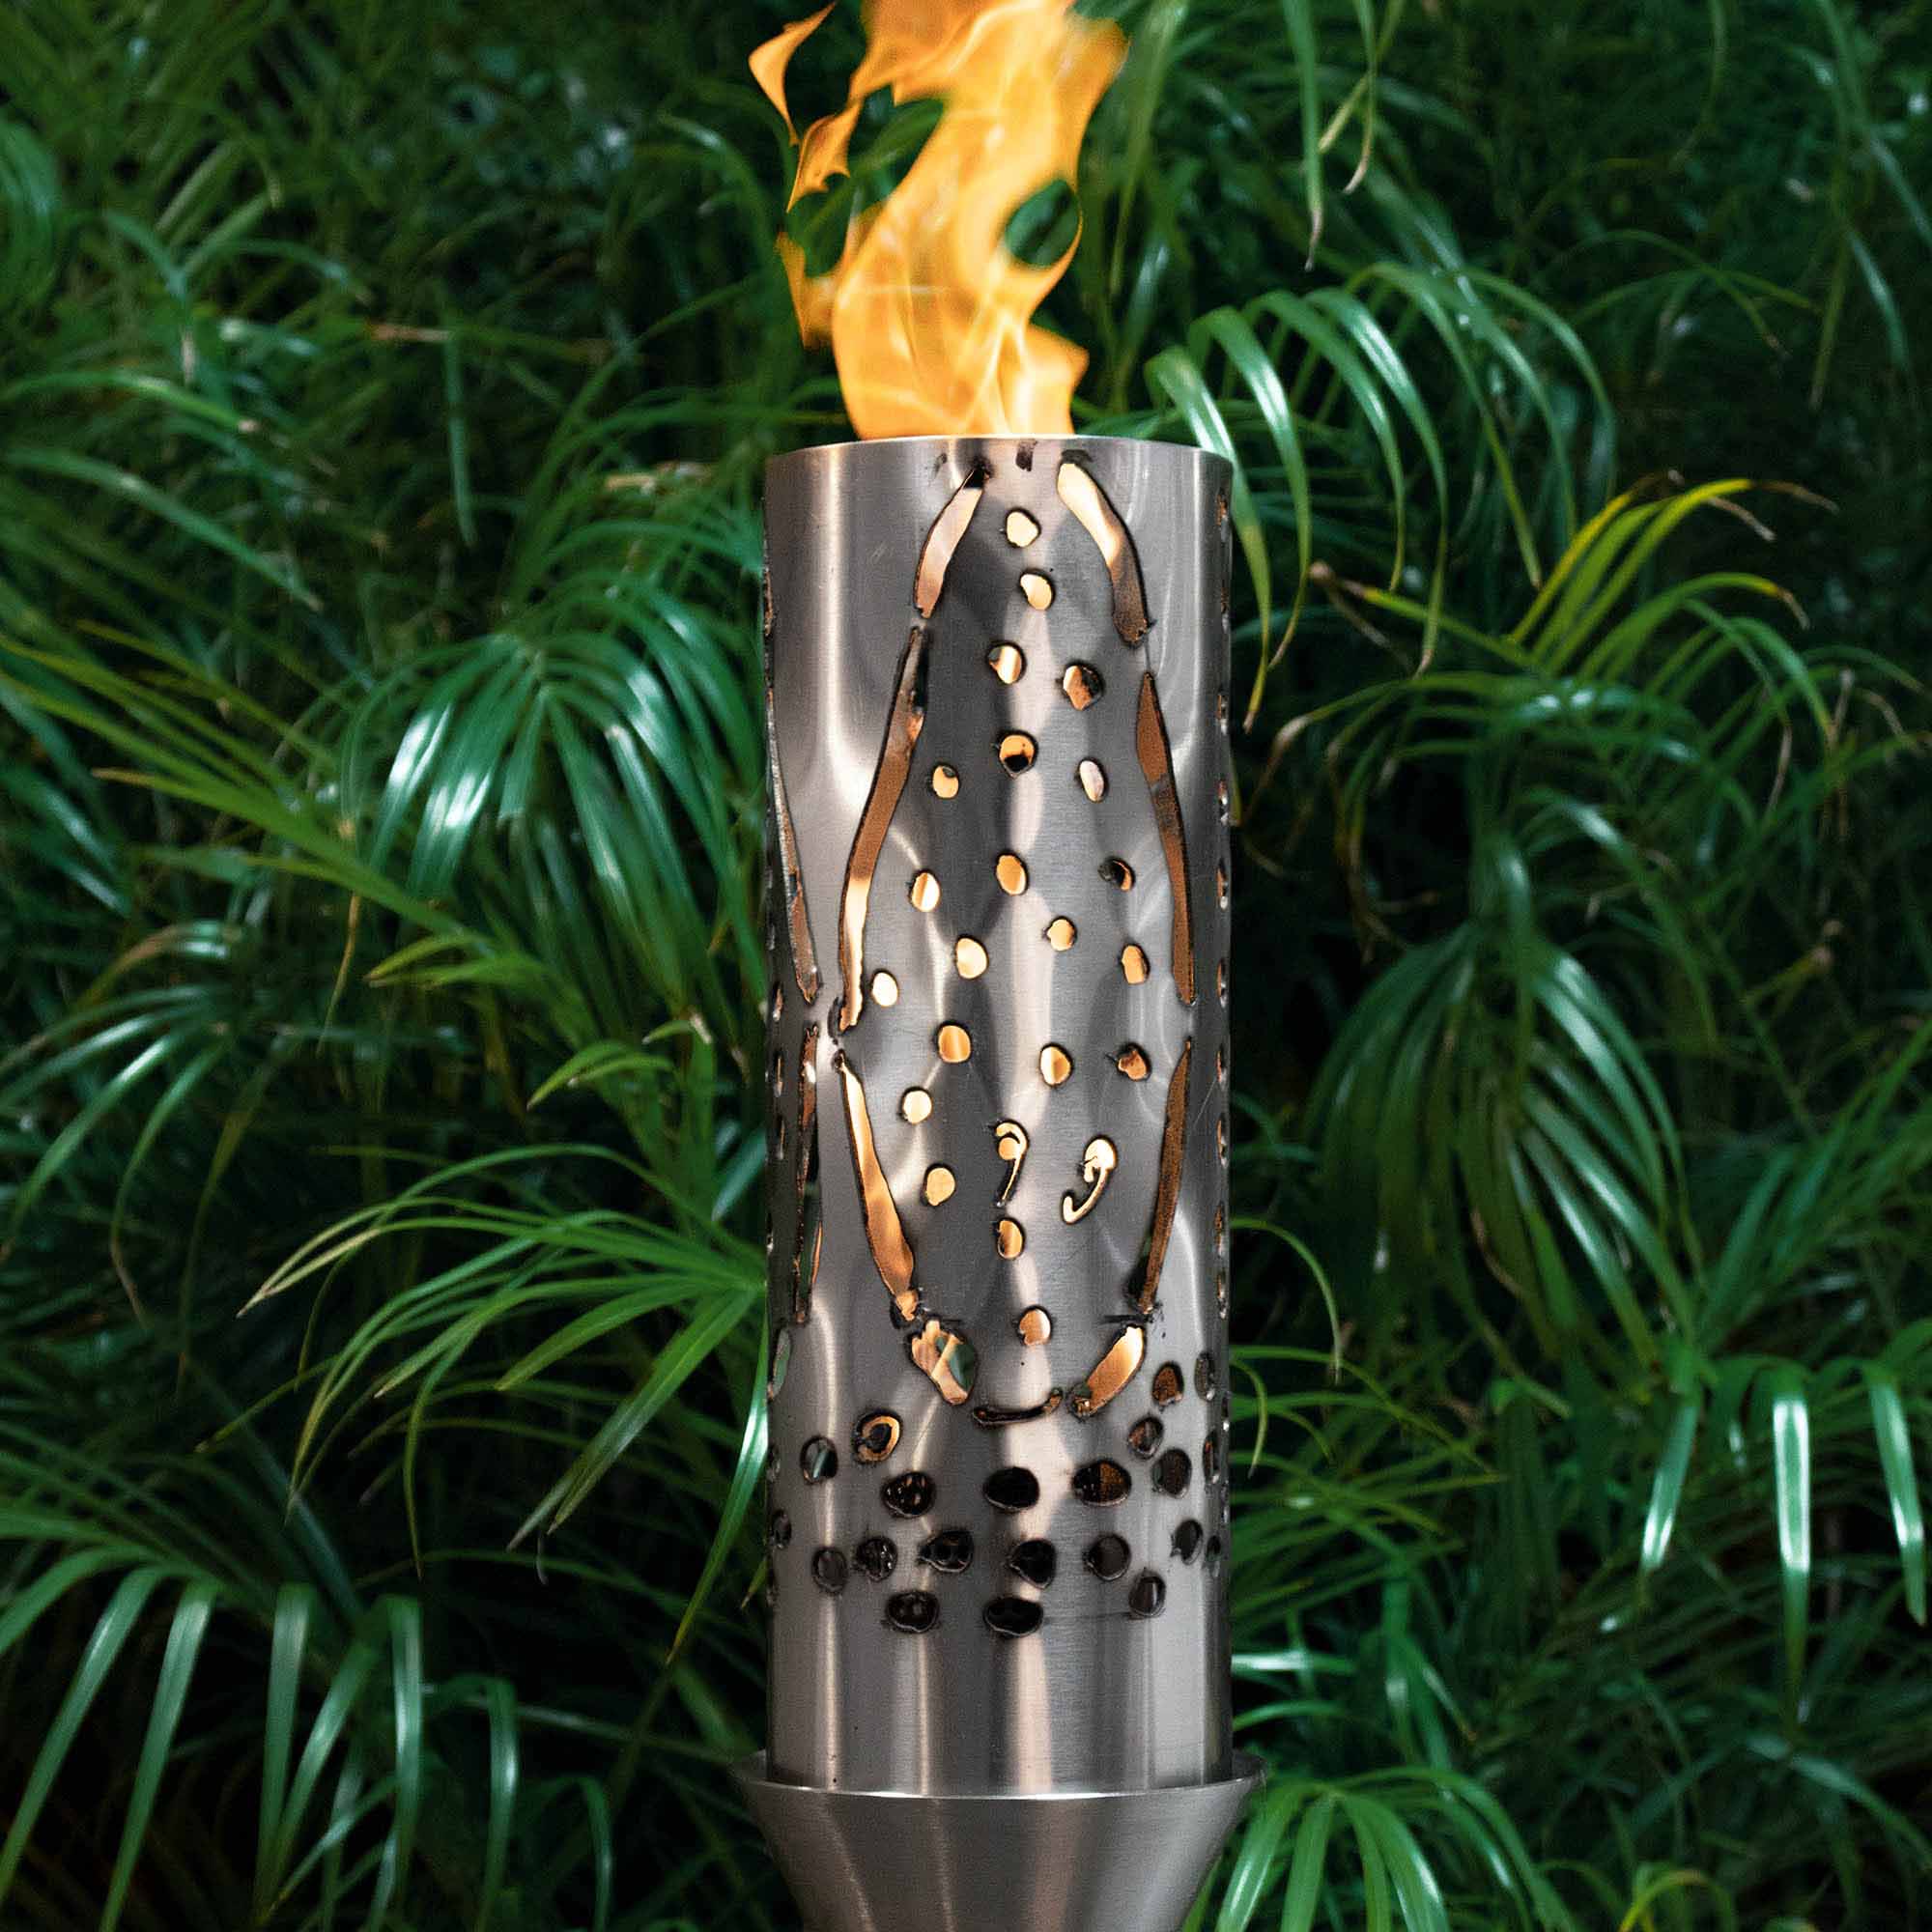 Coral Fire Torch - Kozy Korner Fire Pits